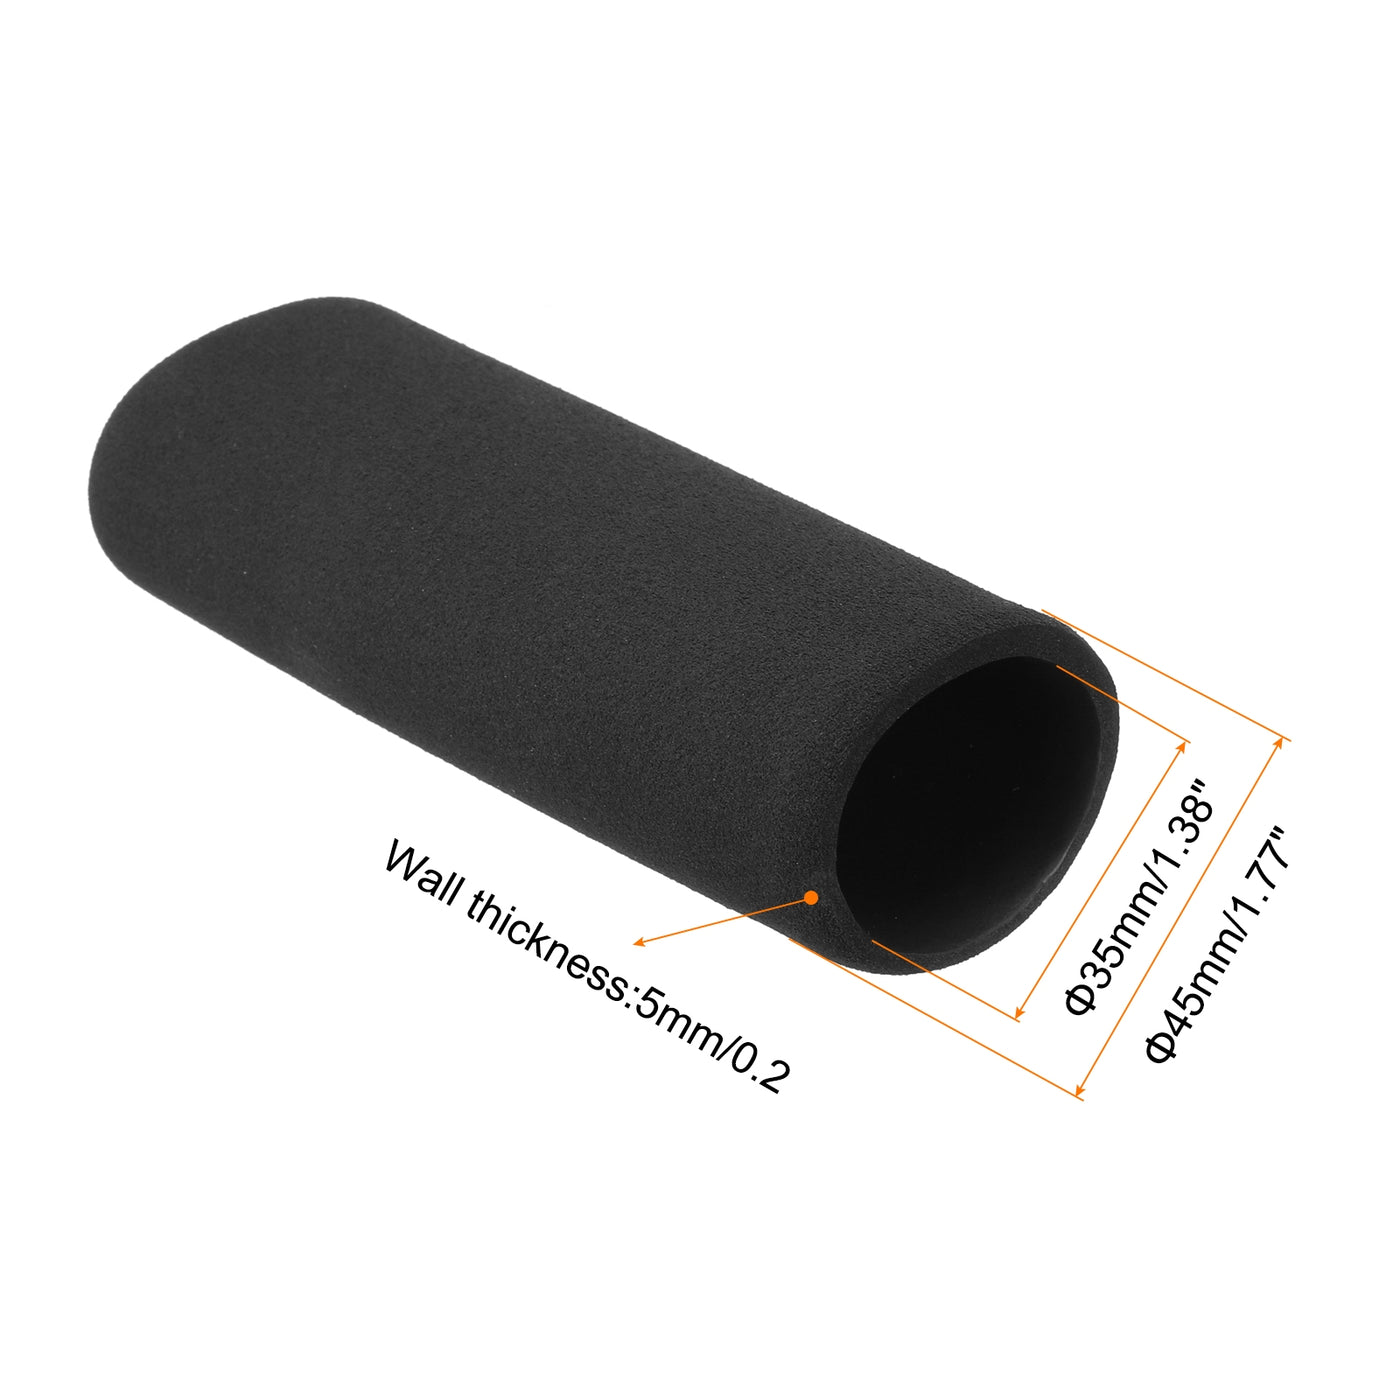 uxcell Uxcell Pipe Insulation Tube Foam Tubing for Handle Grip Support 35mm ID 45mm OD 116mm Heat Preservation Black 2pcs